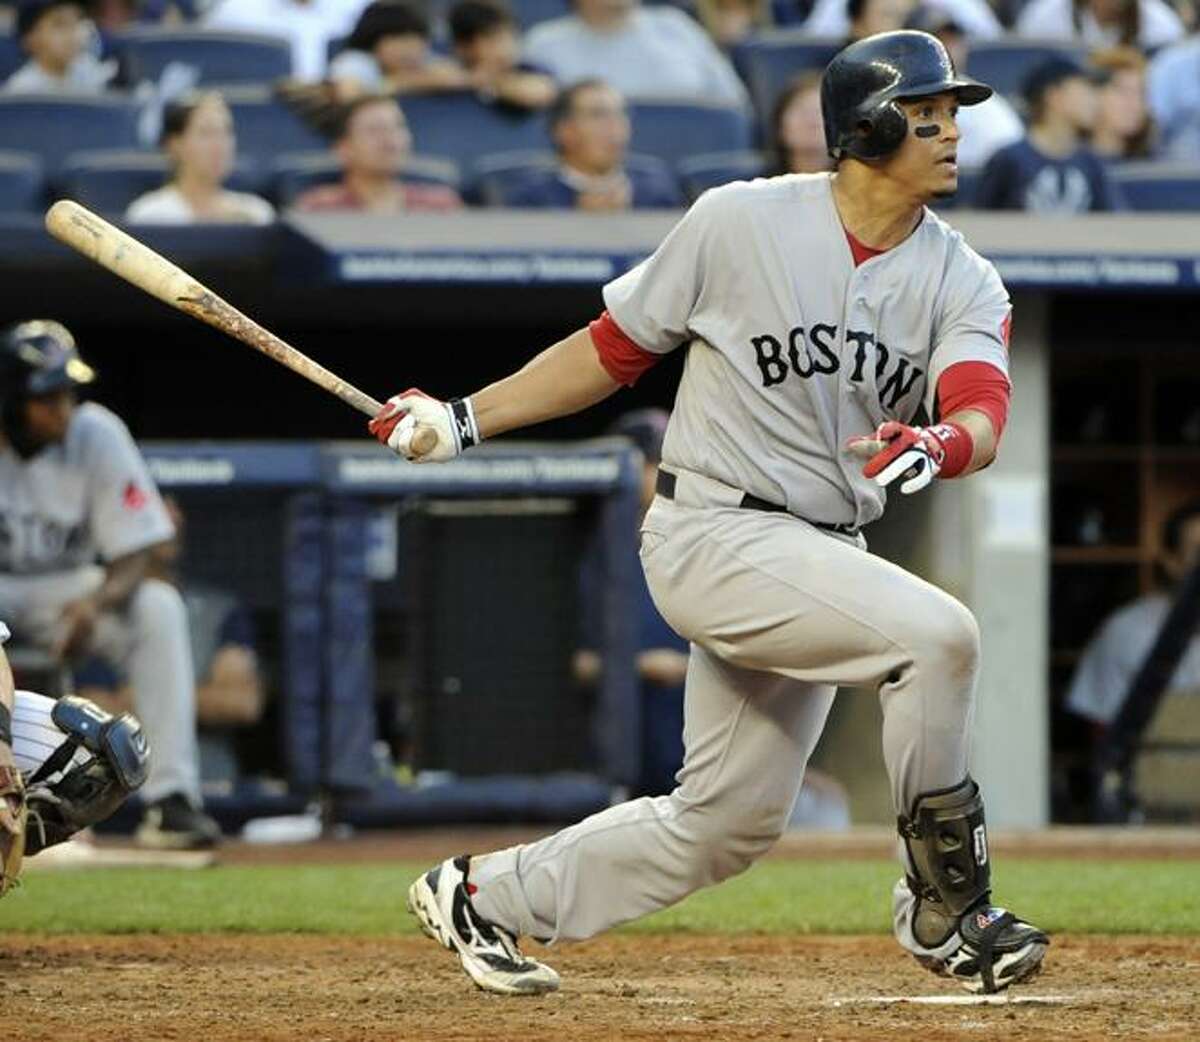 FILE - This Sept. 25, 2010, file photo shows Boston Red Sox batter Victor Martinez following through on a home run during the seventh inning of a baseball game against the New York Yankees, at Yankee Stadium in New York. A person familiar with the agreement tells The Associated Press that catcher Martinez and the Detroit Tigers have reached a preliminary agreement on a $50 million, four-year contract. The person spoke on condition of anonymity Tuesday, Nov. 23, 2010, because the deal, which is subject to a physical, had not yet been announced. (AP Photo/Bill Kostroun, File)